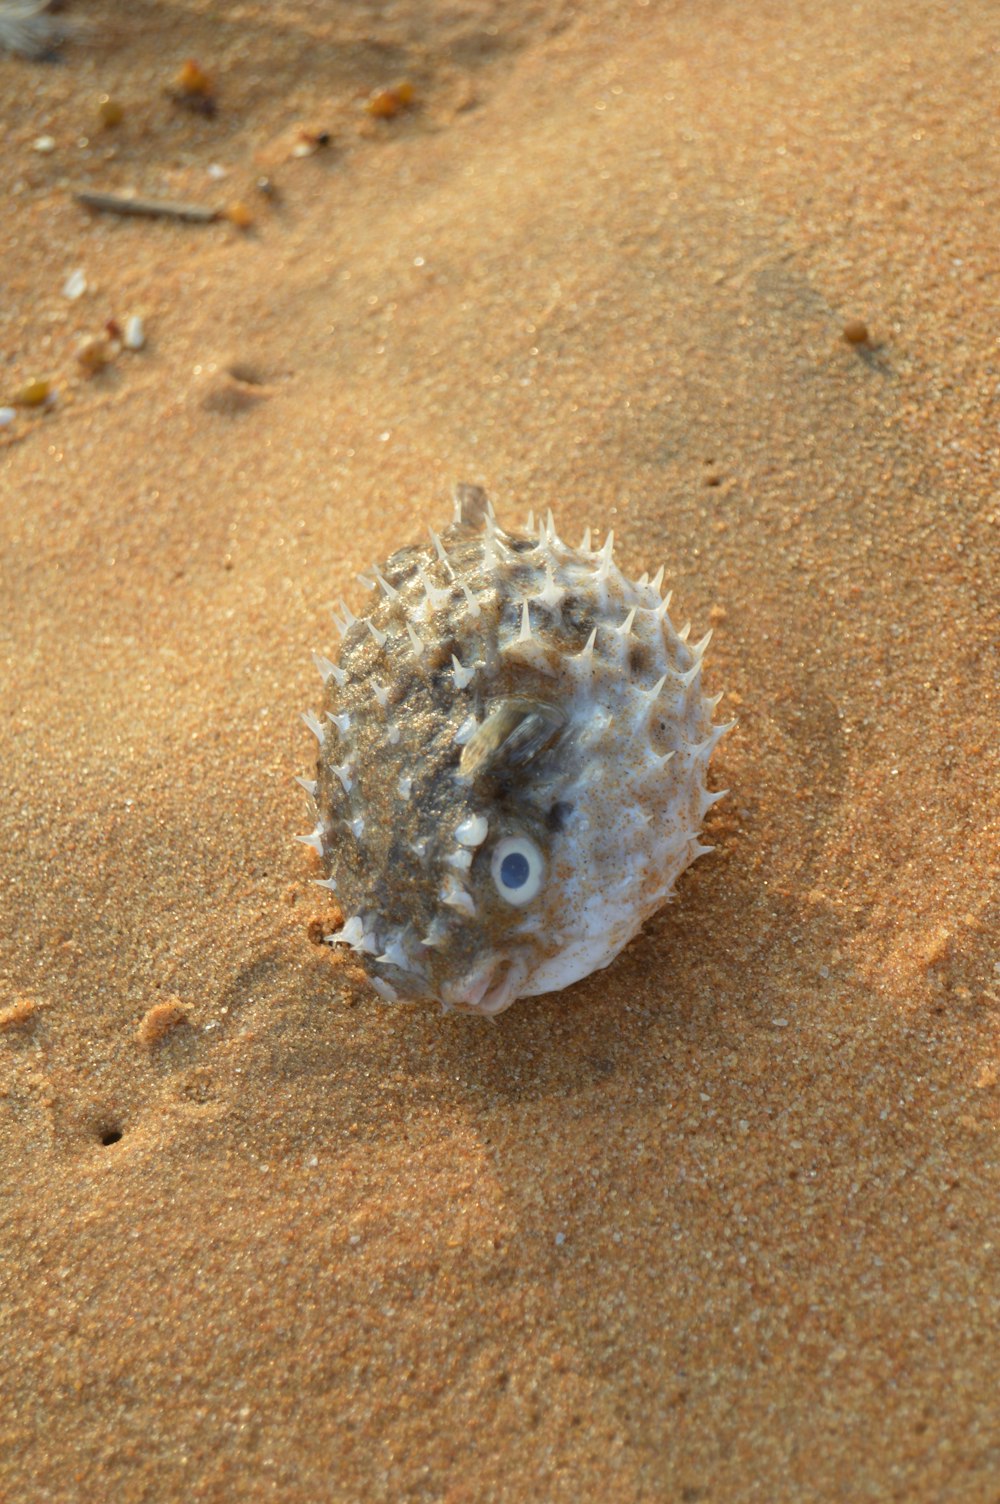 Puffer Fish Pictures | Download Free Images on Unsplash